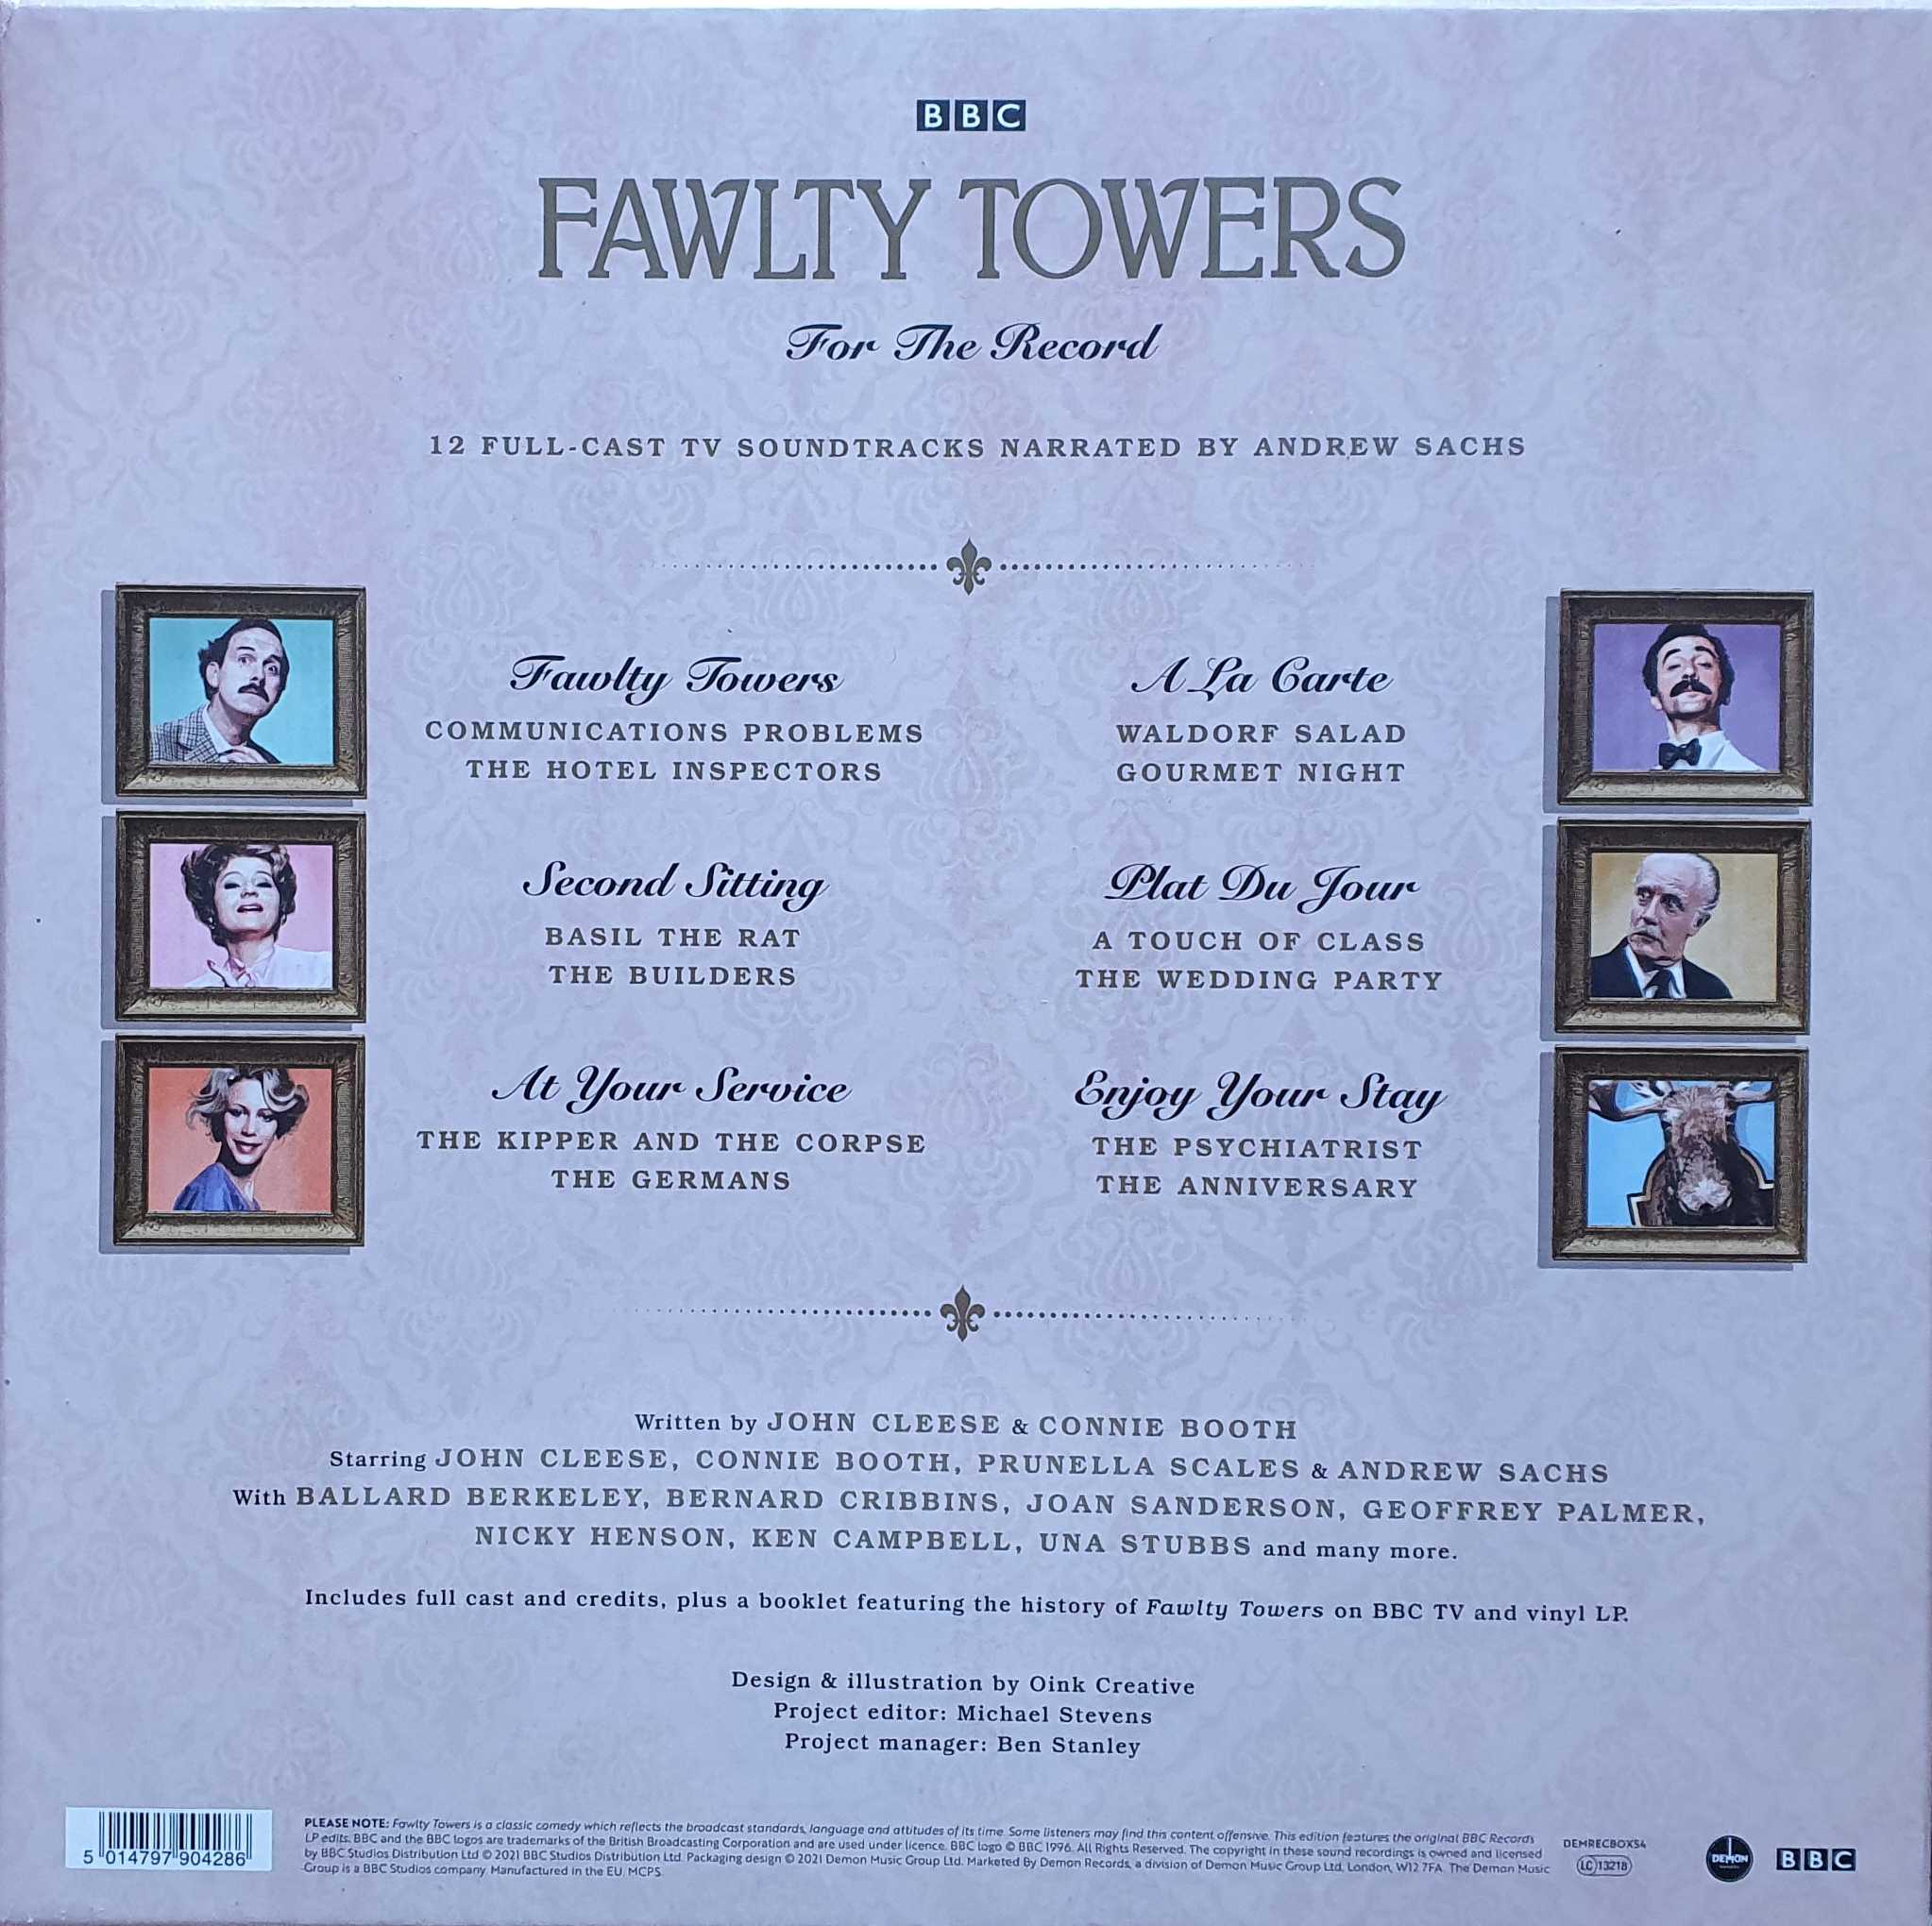 Picture of DEMRECBOX 54 Fawlty Towers - For the record by artist John Cleese / Connie Booth from the BBC records and Tapes library